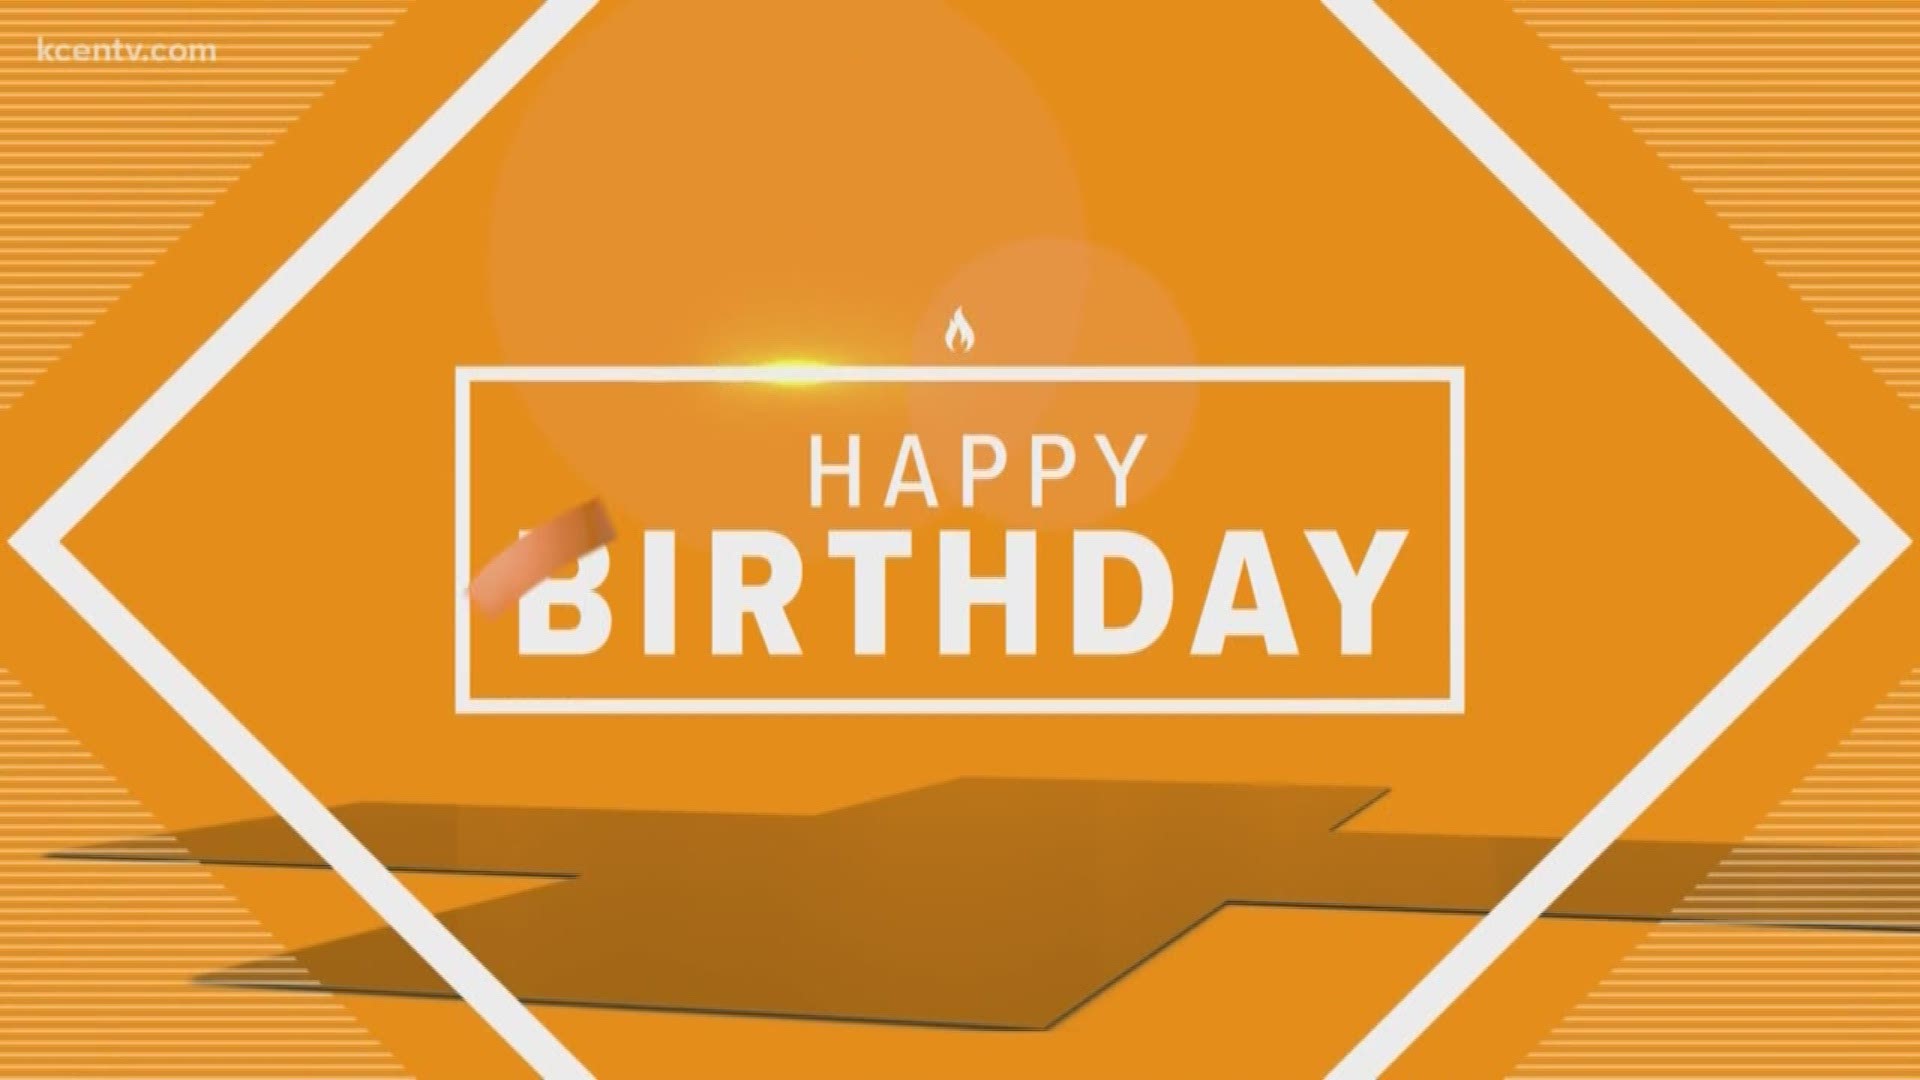 Texas Today wishes a Happy Birthday to everyone on April 10.